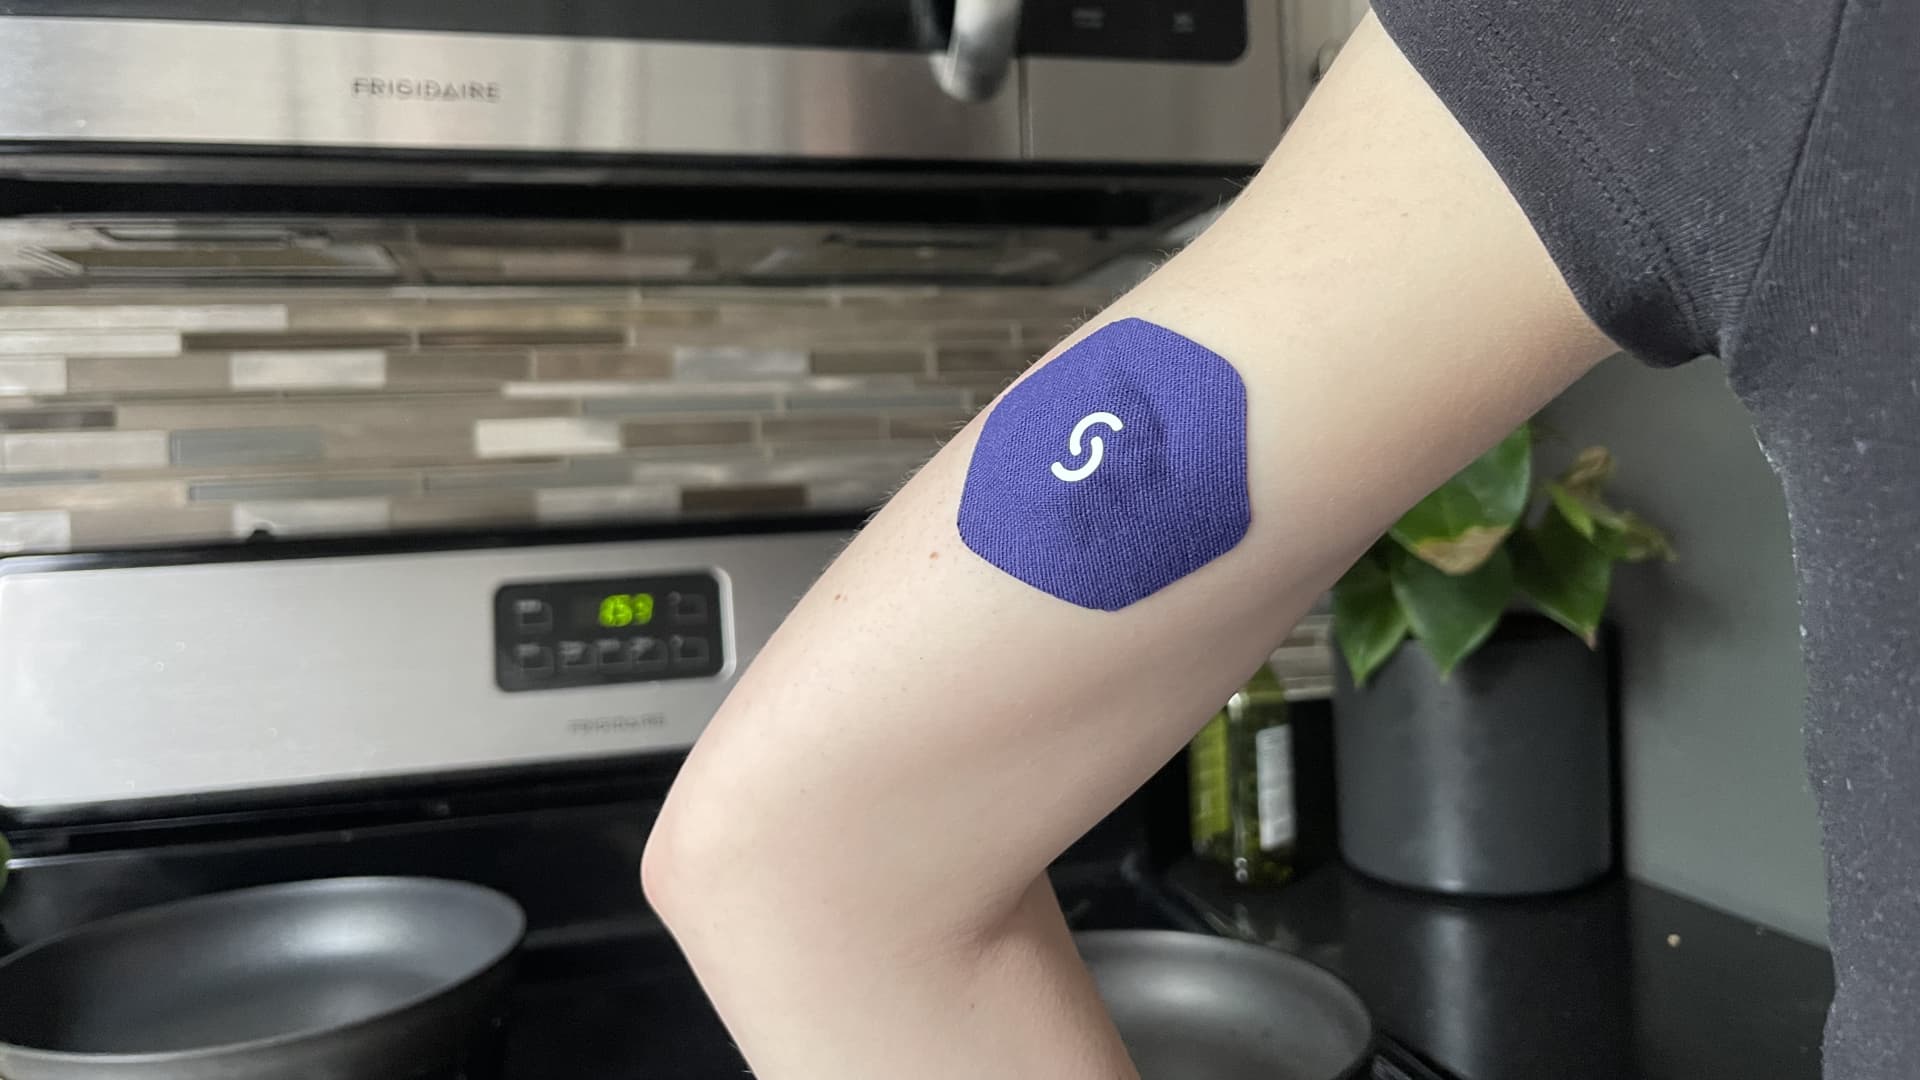 Signos uses a glucose monitor patch and AI to help you eat healthier. Here's what it's like